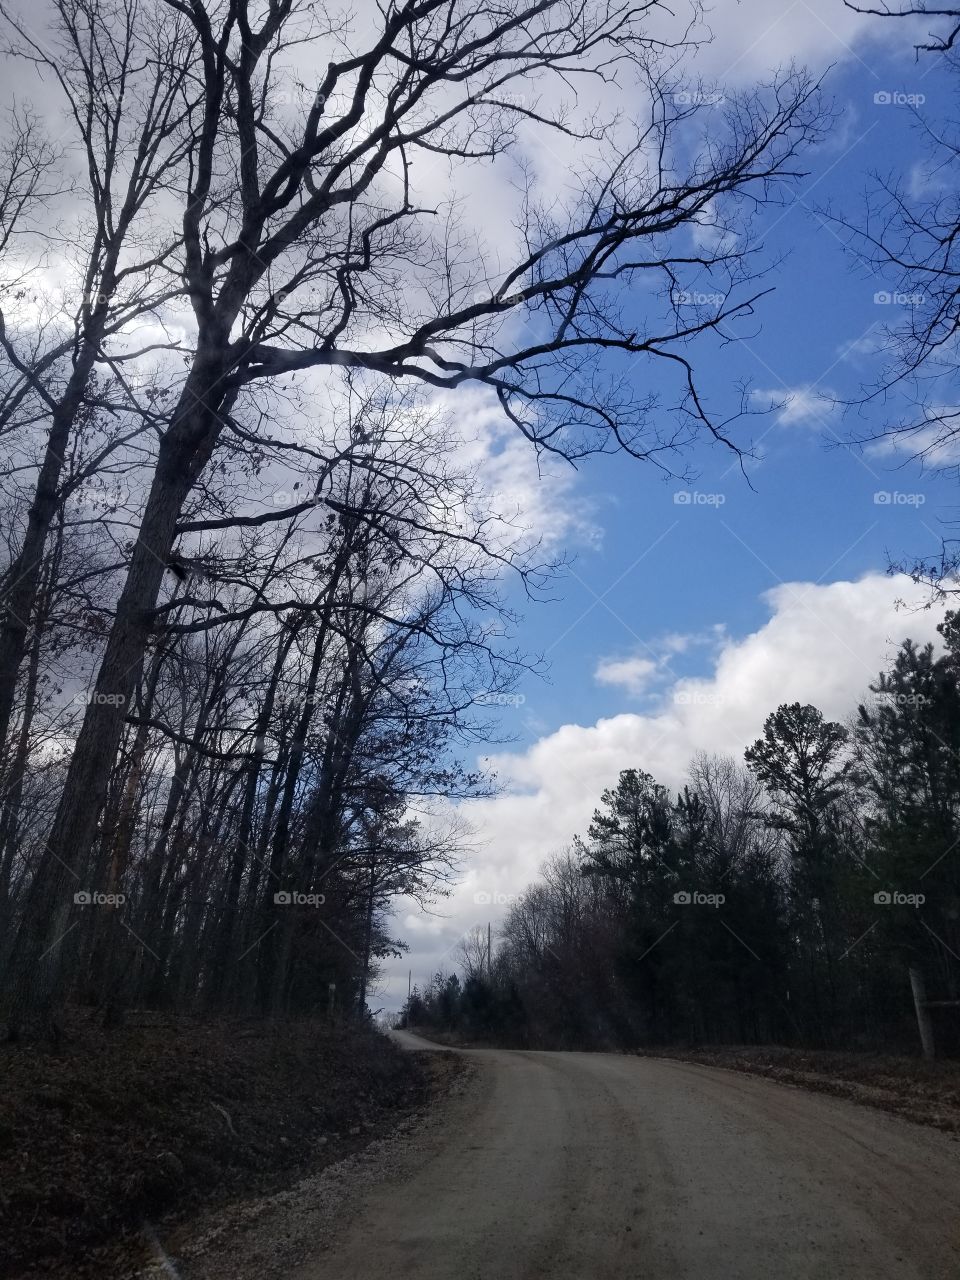 Dirt roads in the early spring